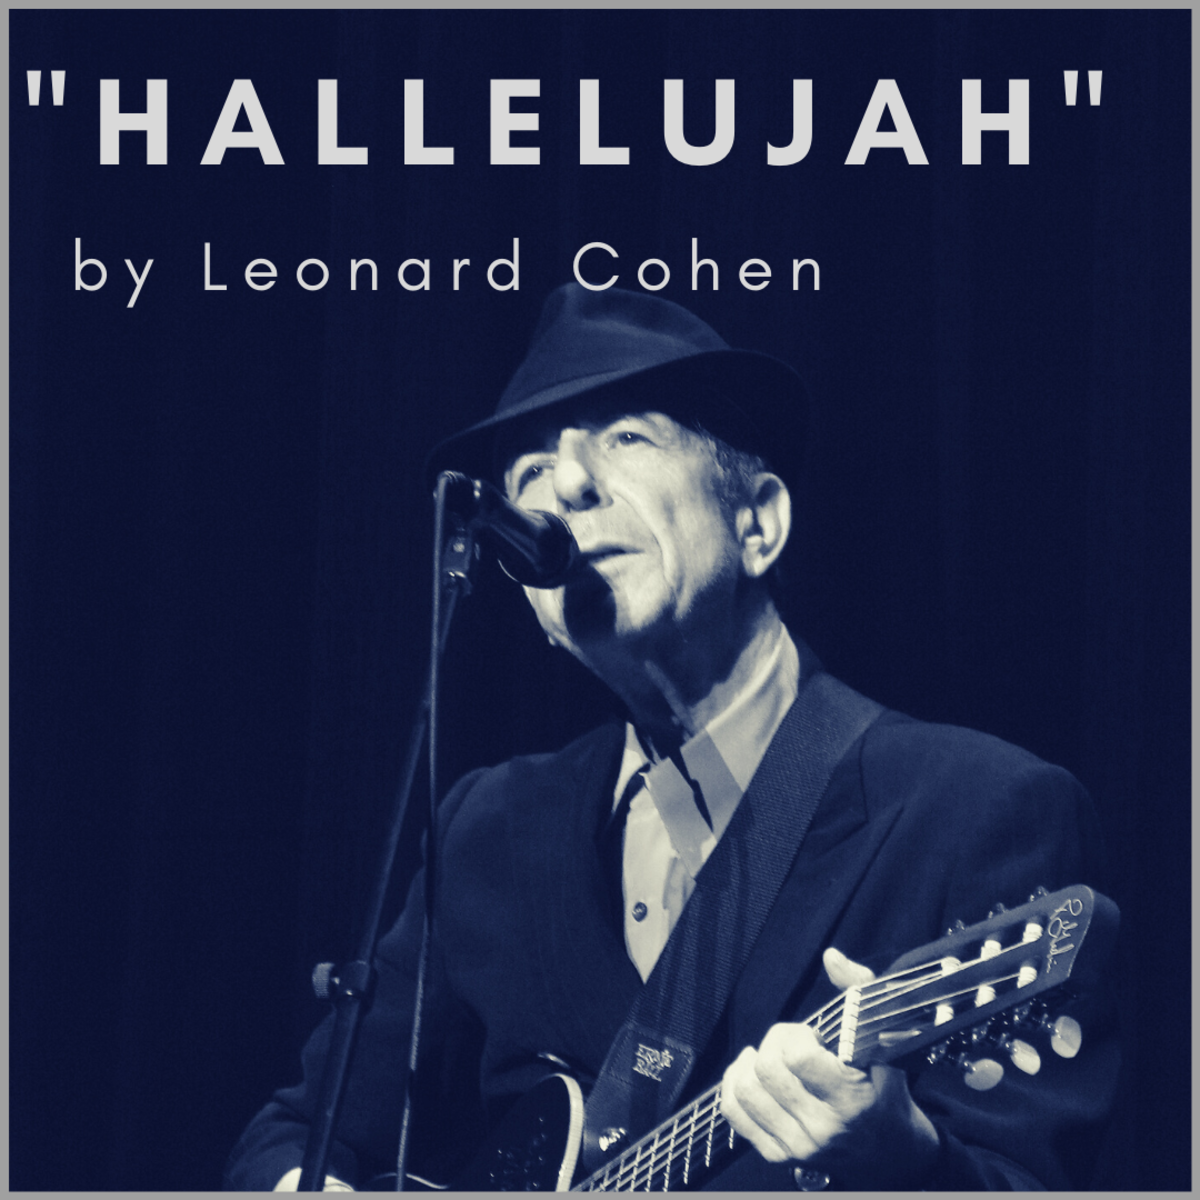 Tracking Down the Christian Roots of the Hallelujah Song